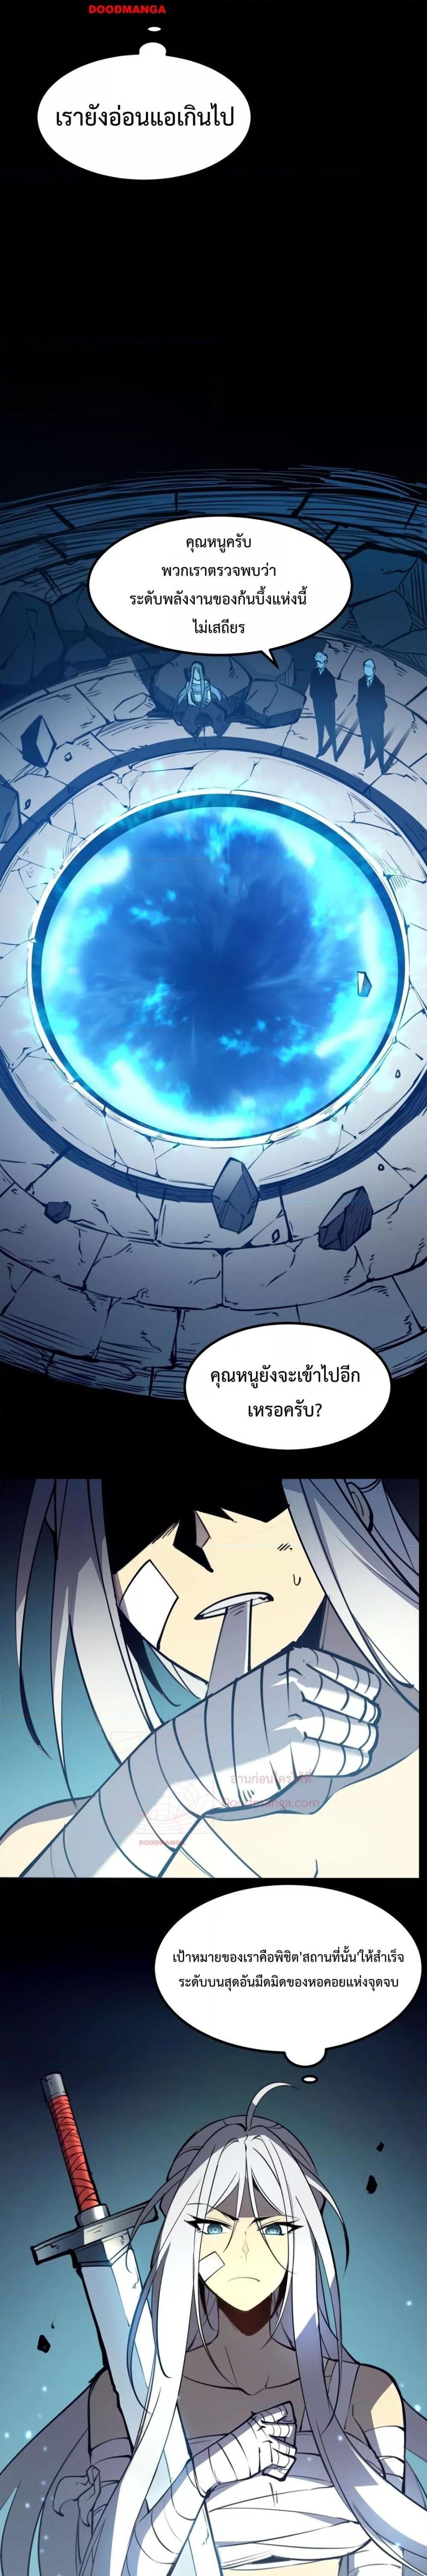 I Became The King by Scavenging โ€“ เนเธเนเธฅเน เน€เธฅเน€เธงเนเธฅเธฅเธฃเธดเนเธ เธ•เธญเธเธ—เธตเน 7 (15)